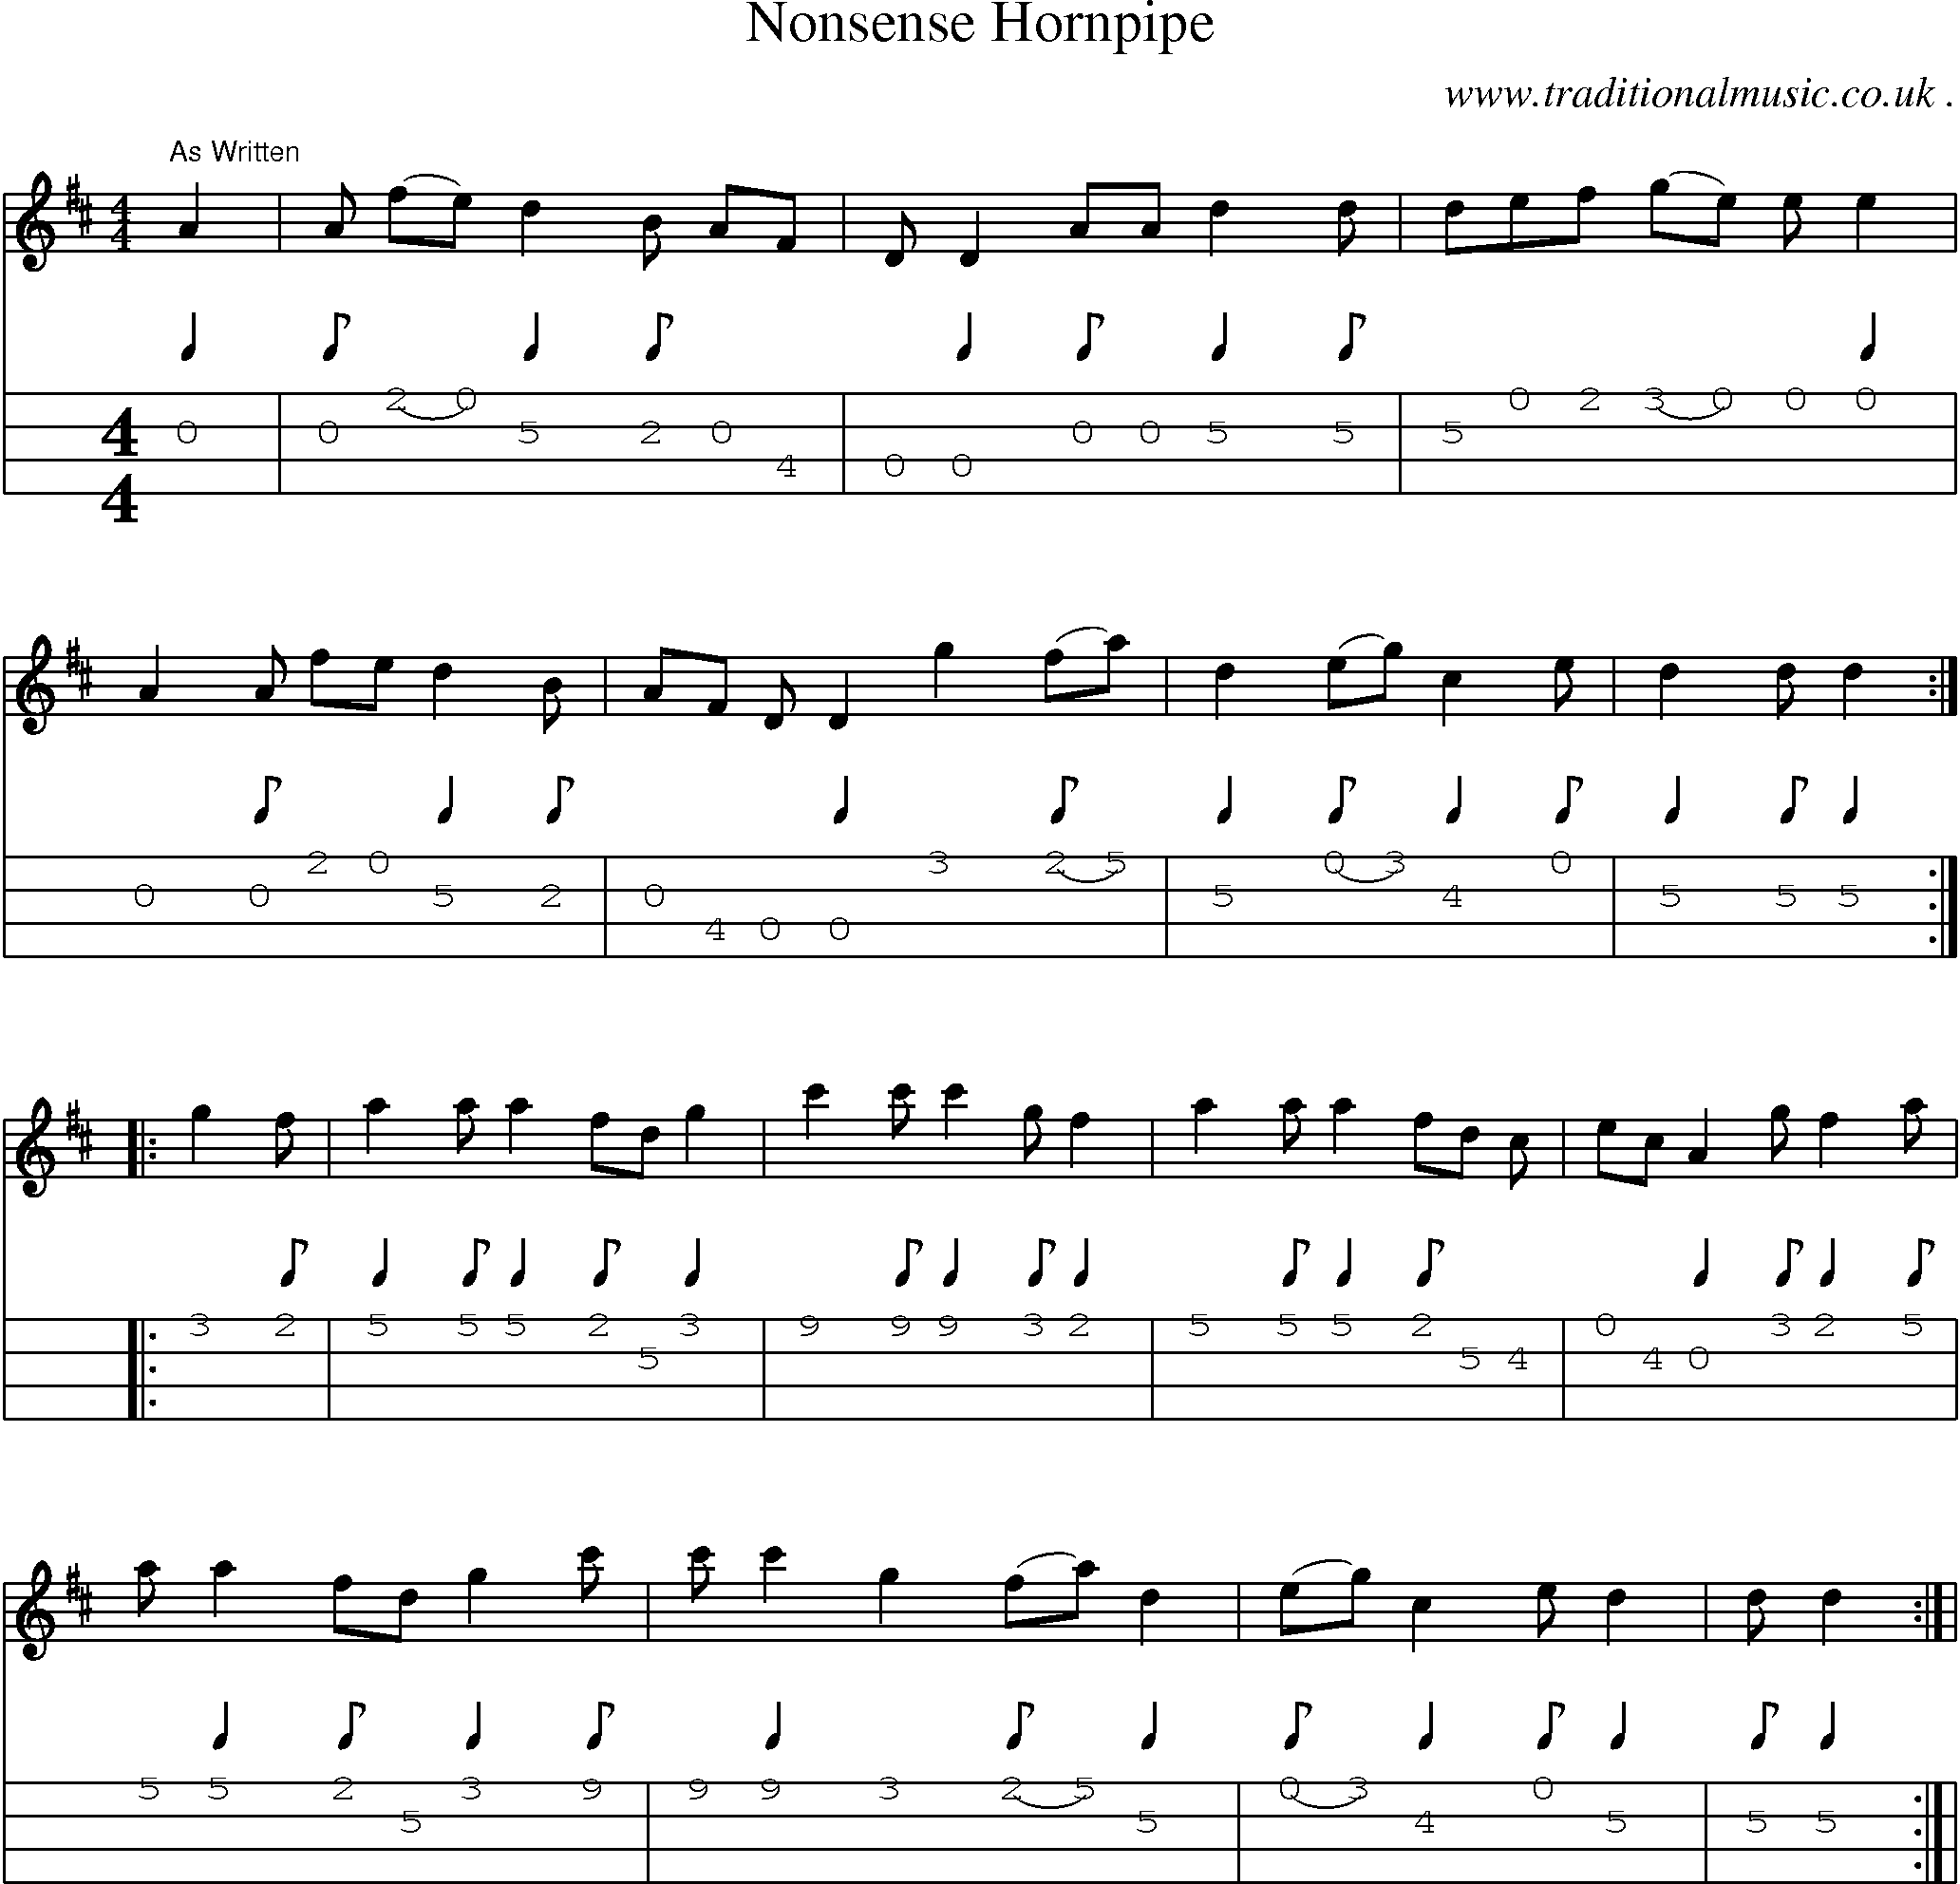 Sheet-Music and Mandolin Tabs for Nonsense Hornpipe